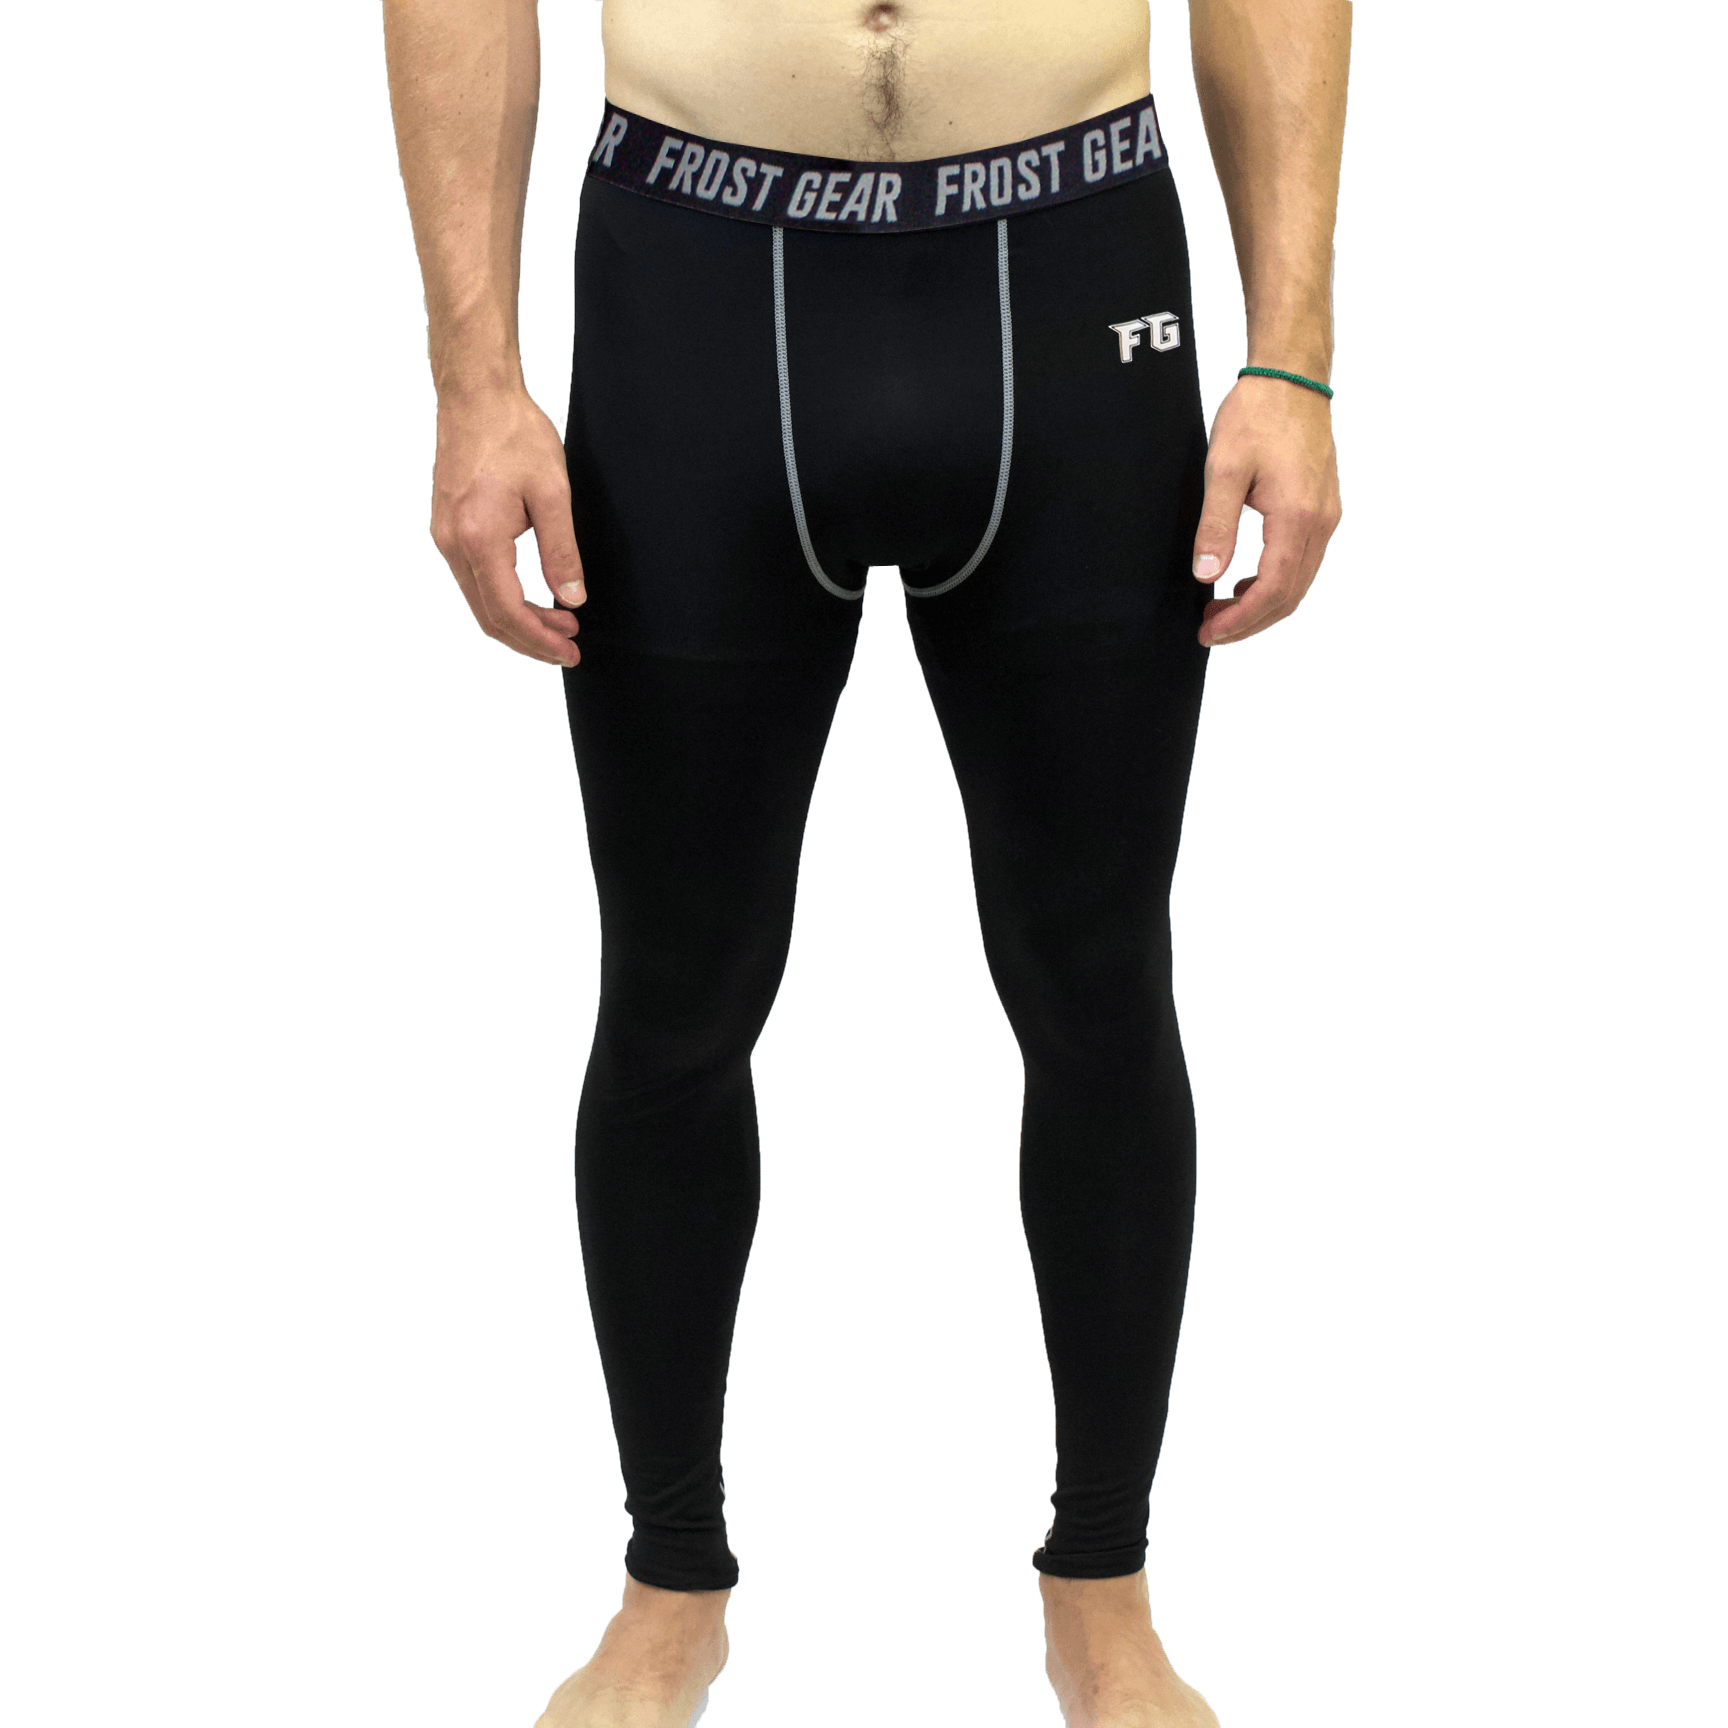 FG Pro On-Field Compression Pants - Adult Male